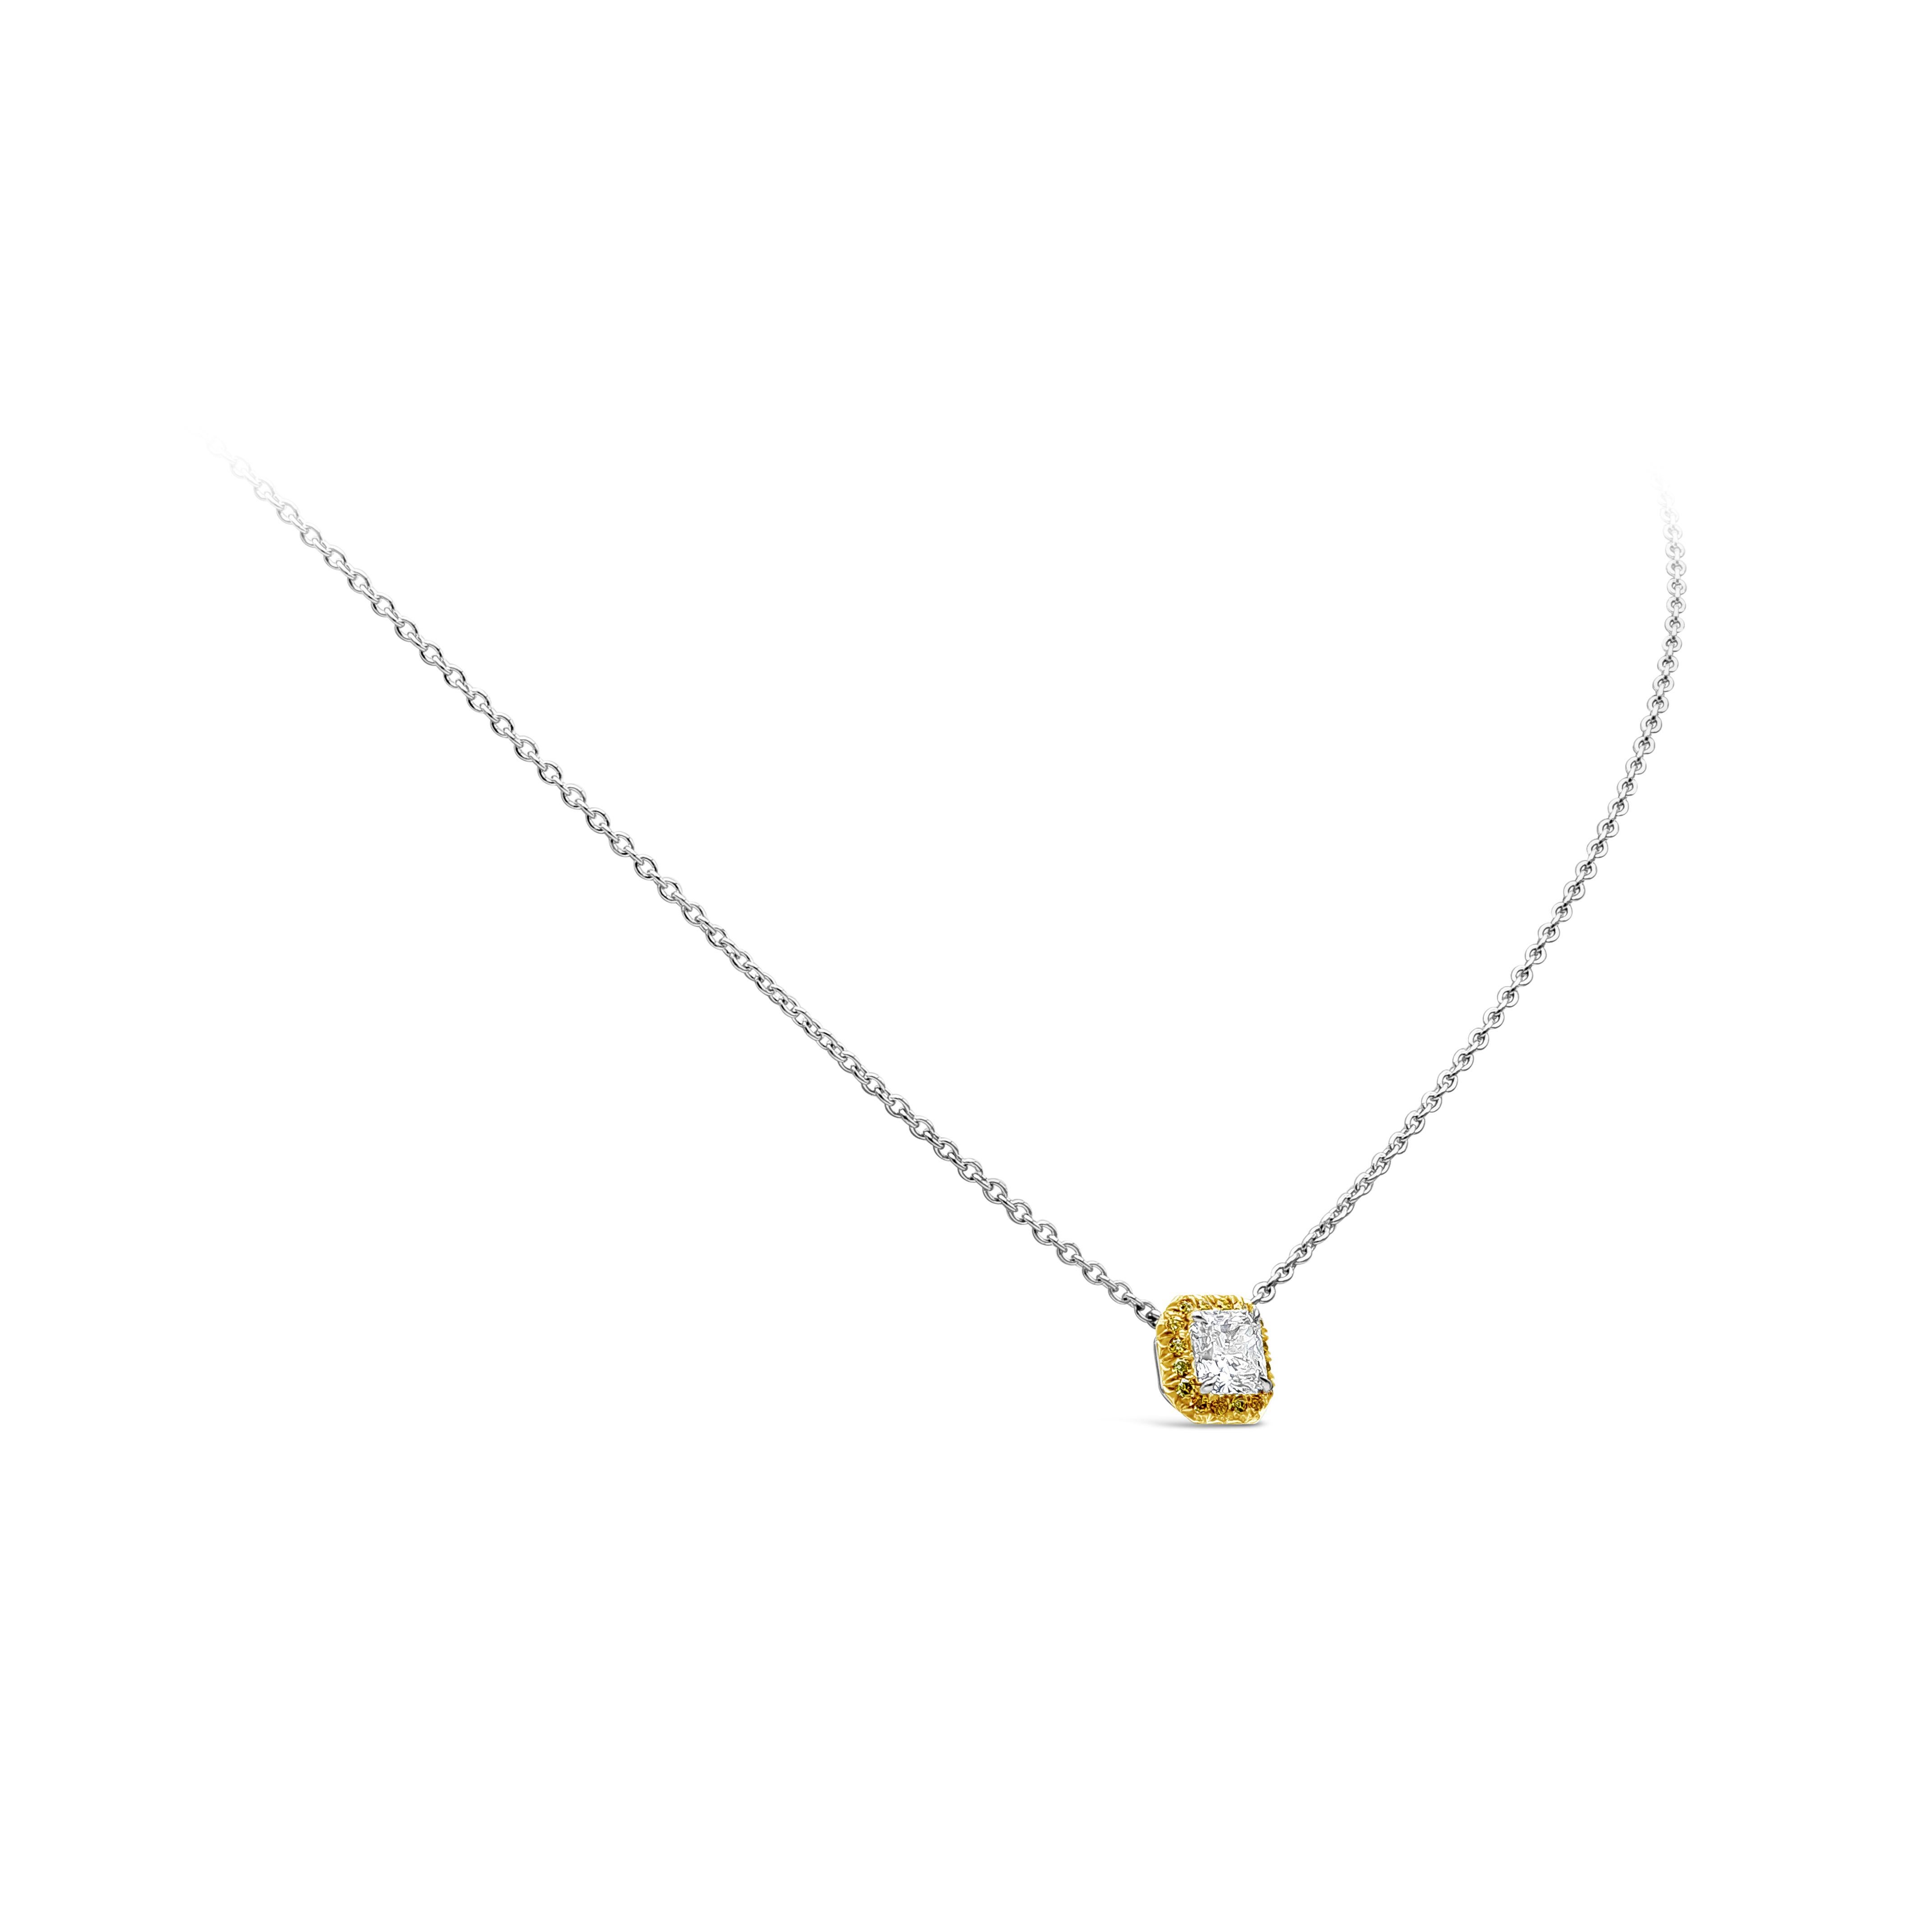 A simple pendant necklace showcasing a 0.85 carat radiant cut diamond, GIA certified M-VVS2, set in a 0.17 carat brilliant cut vivid yellow diamond halo. Made in Platinum.

This style has matching earring. Please contact us for more information.